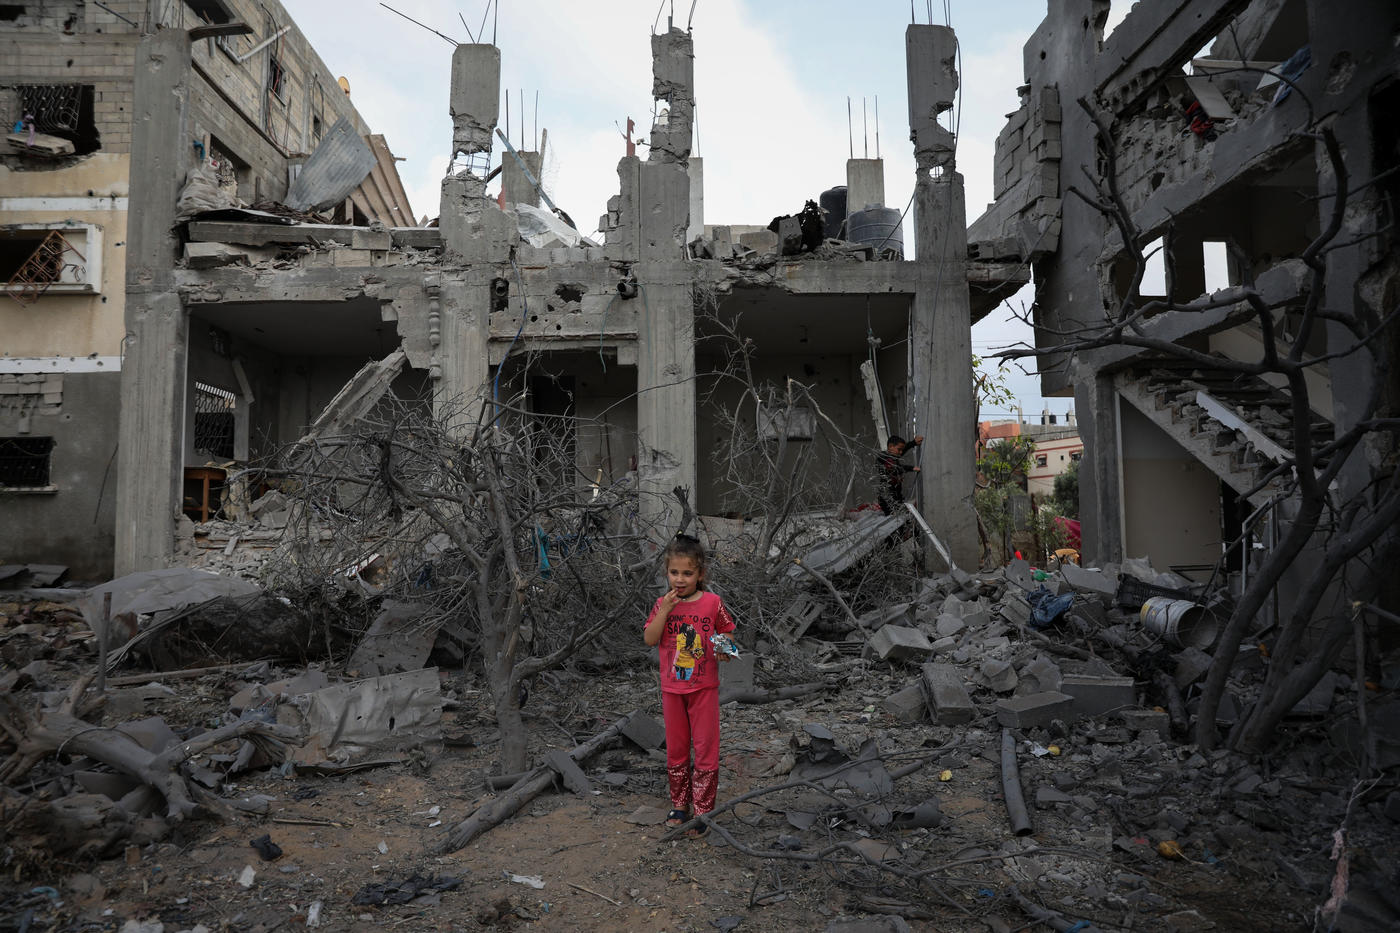 A child stands in the wreckage of her neighbourhood in the Gaza Strip following Israel's military bombing campaign in May 2021. (MEE/Mohammed al-Hajjar)